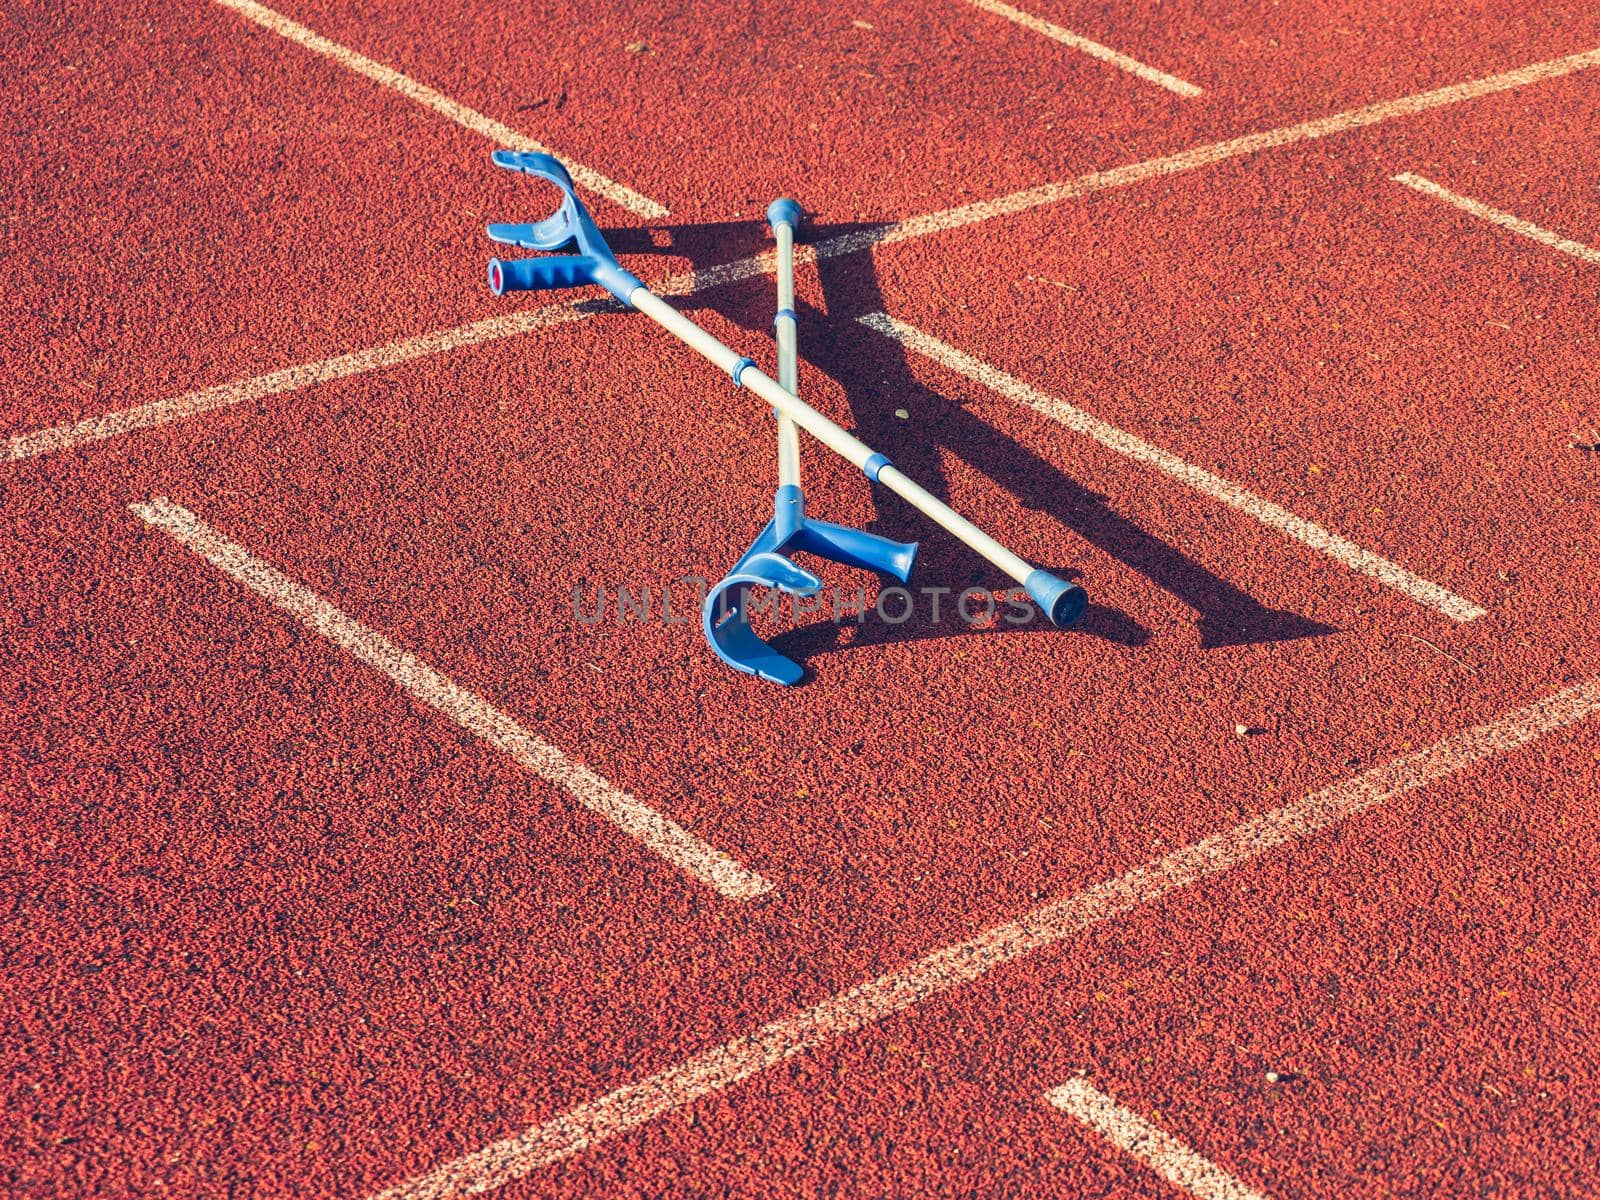 Pair of hospital crutches on stadium running track. Sticks for help when you have an orthopedic injury and are giving it time to heal